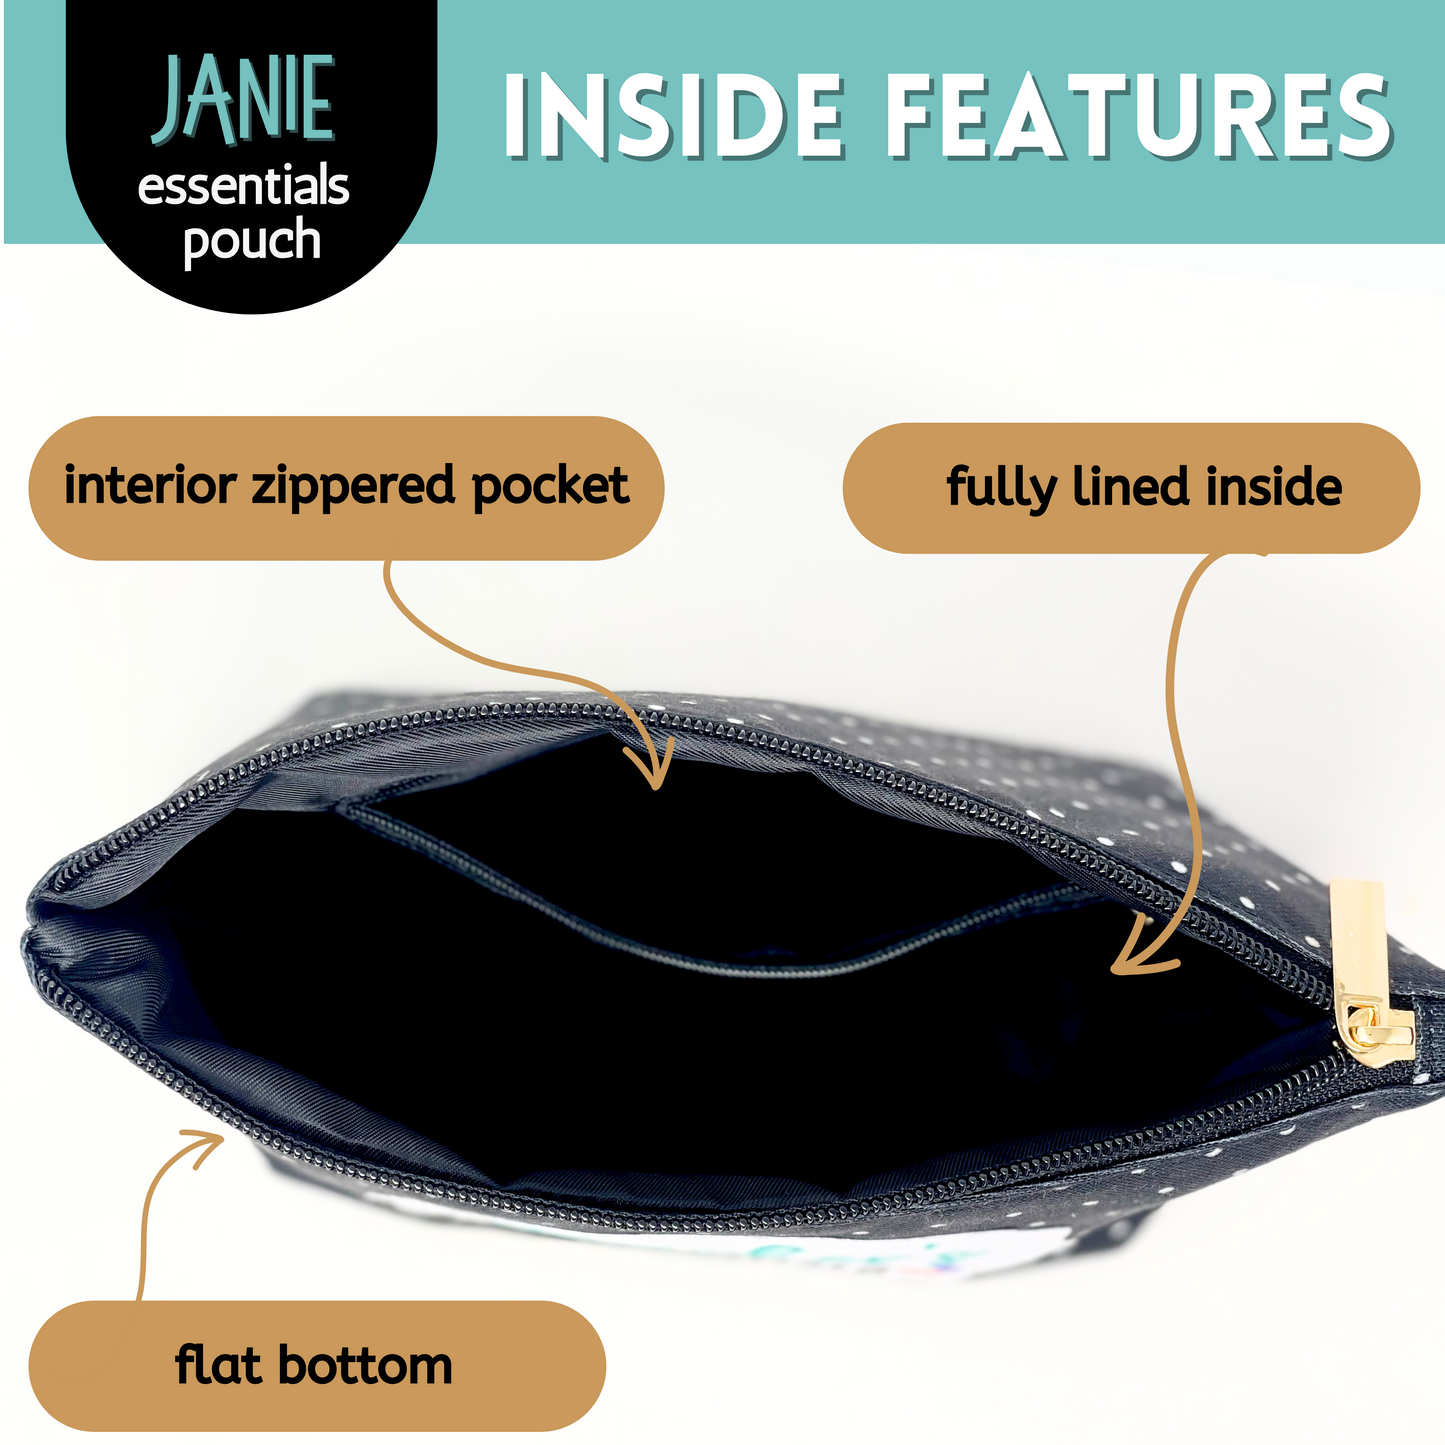 Nurse's Essentials Janie Pouch Gifts for Women Dotted Makeup Bags Cosmetic Bag Travel Toiletry Makeup Pouch Pencil Bag with Zipper Best Nurse Front Liner Medic Just Because Gifts